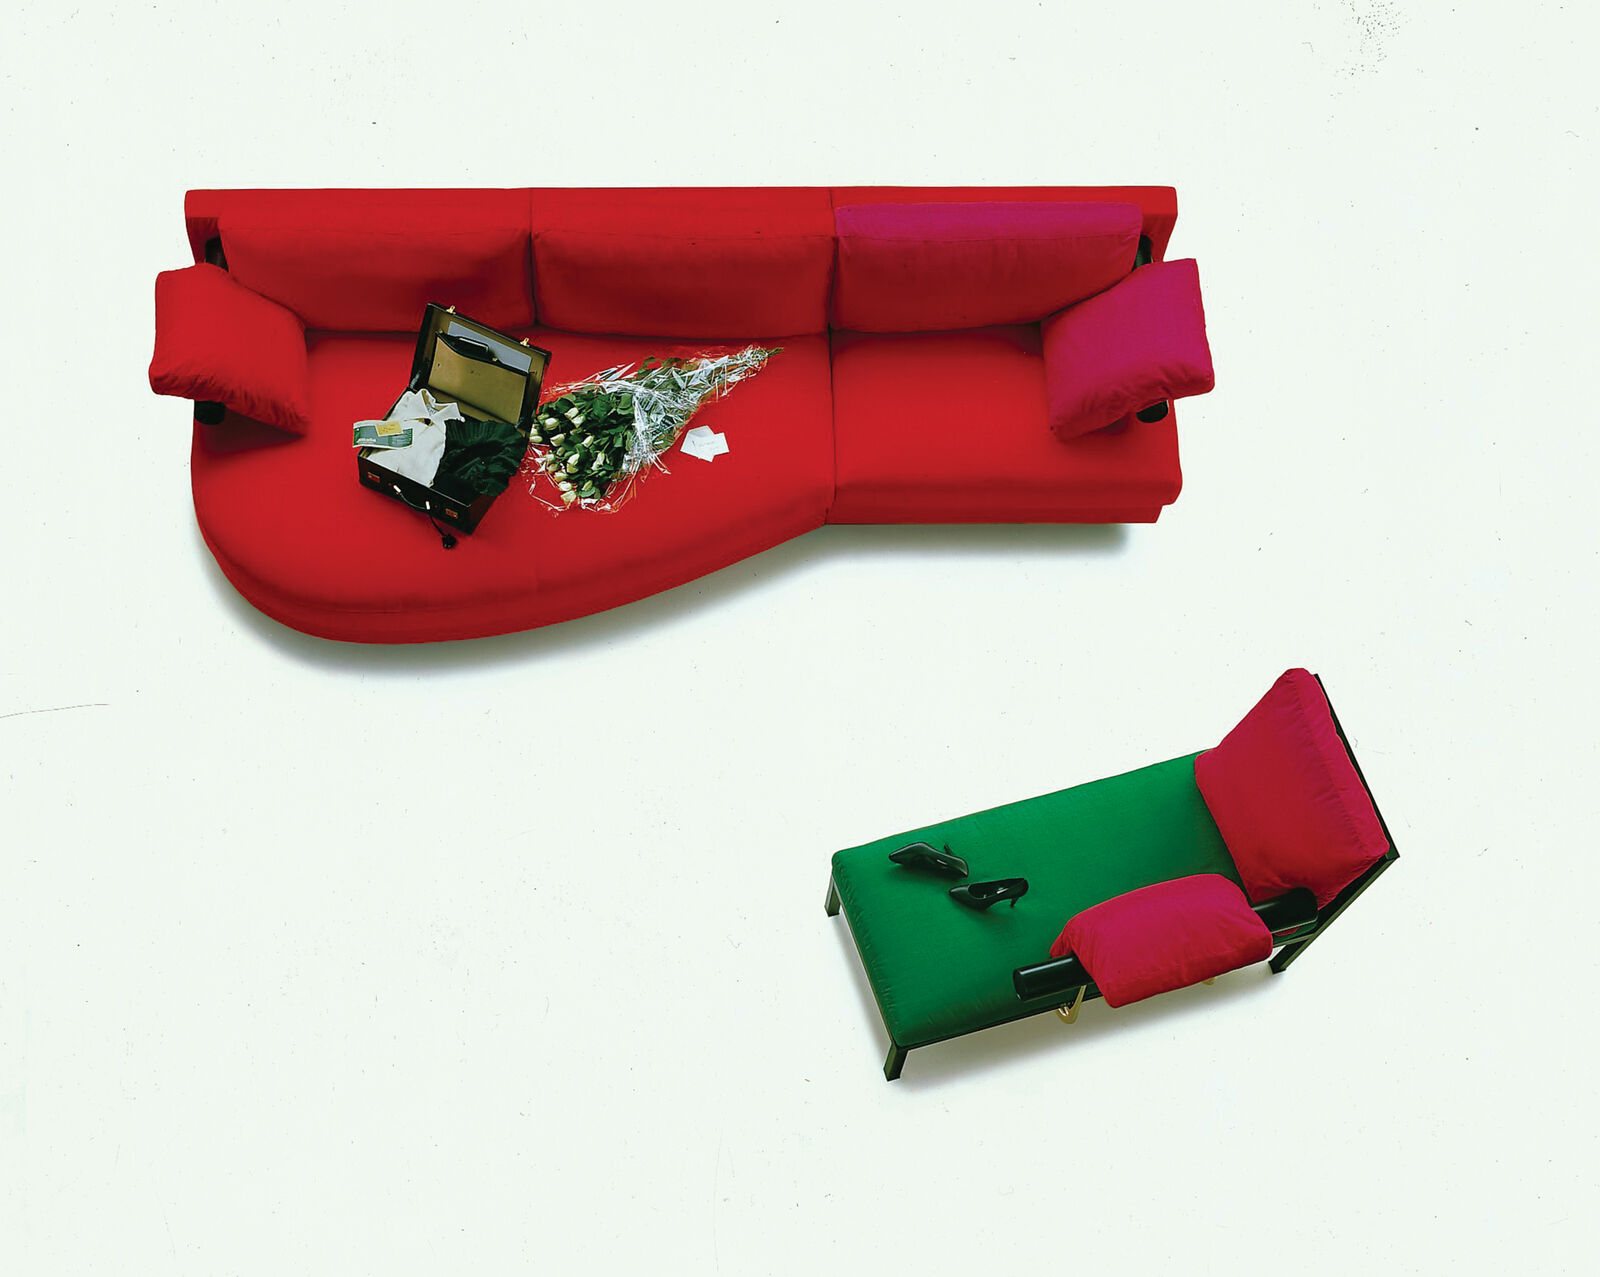 Red Sofa by B&B Italia 80's collection